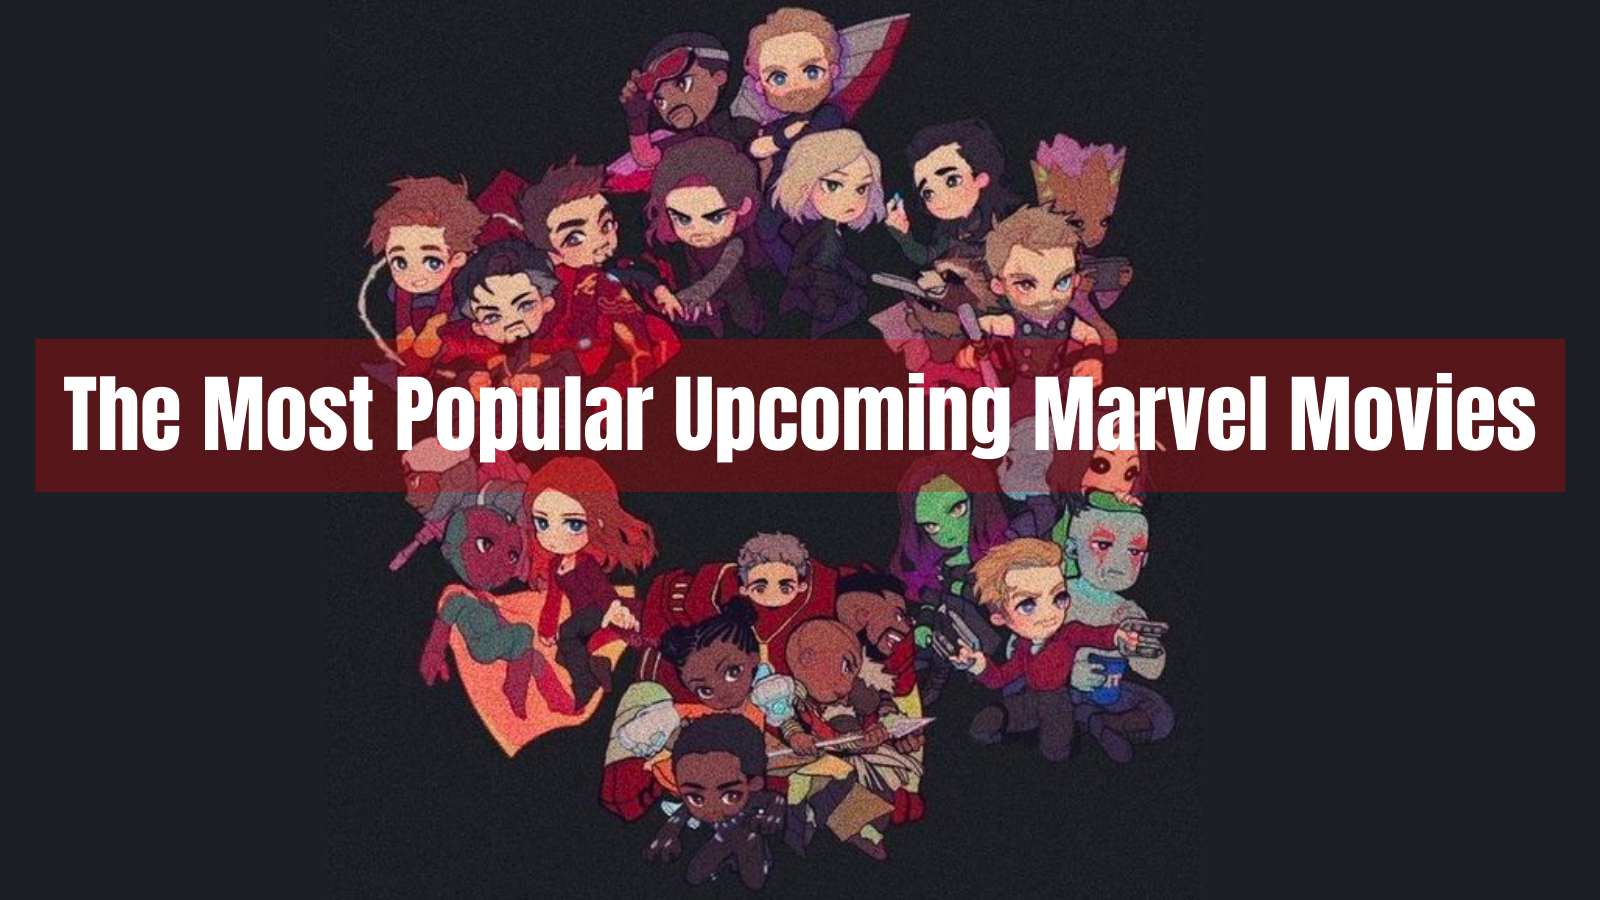 The Most Popular Upcoming Marvel Movies of 2022-23